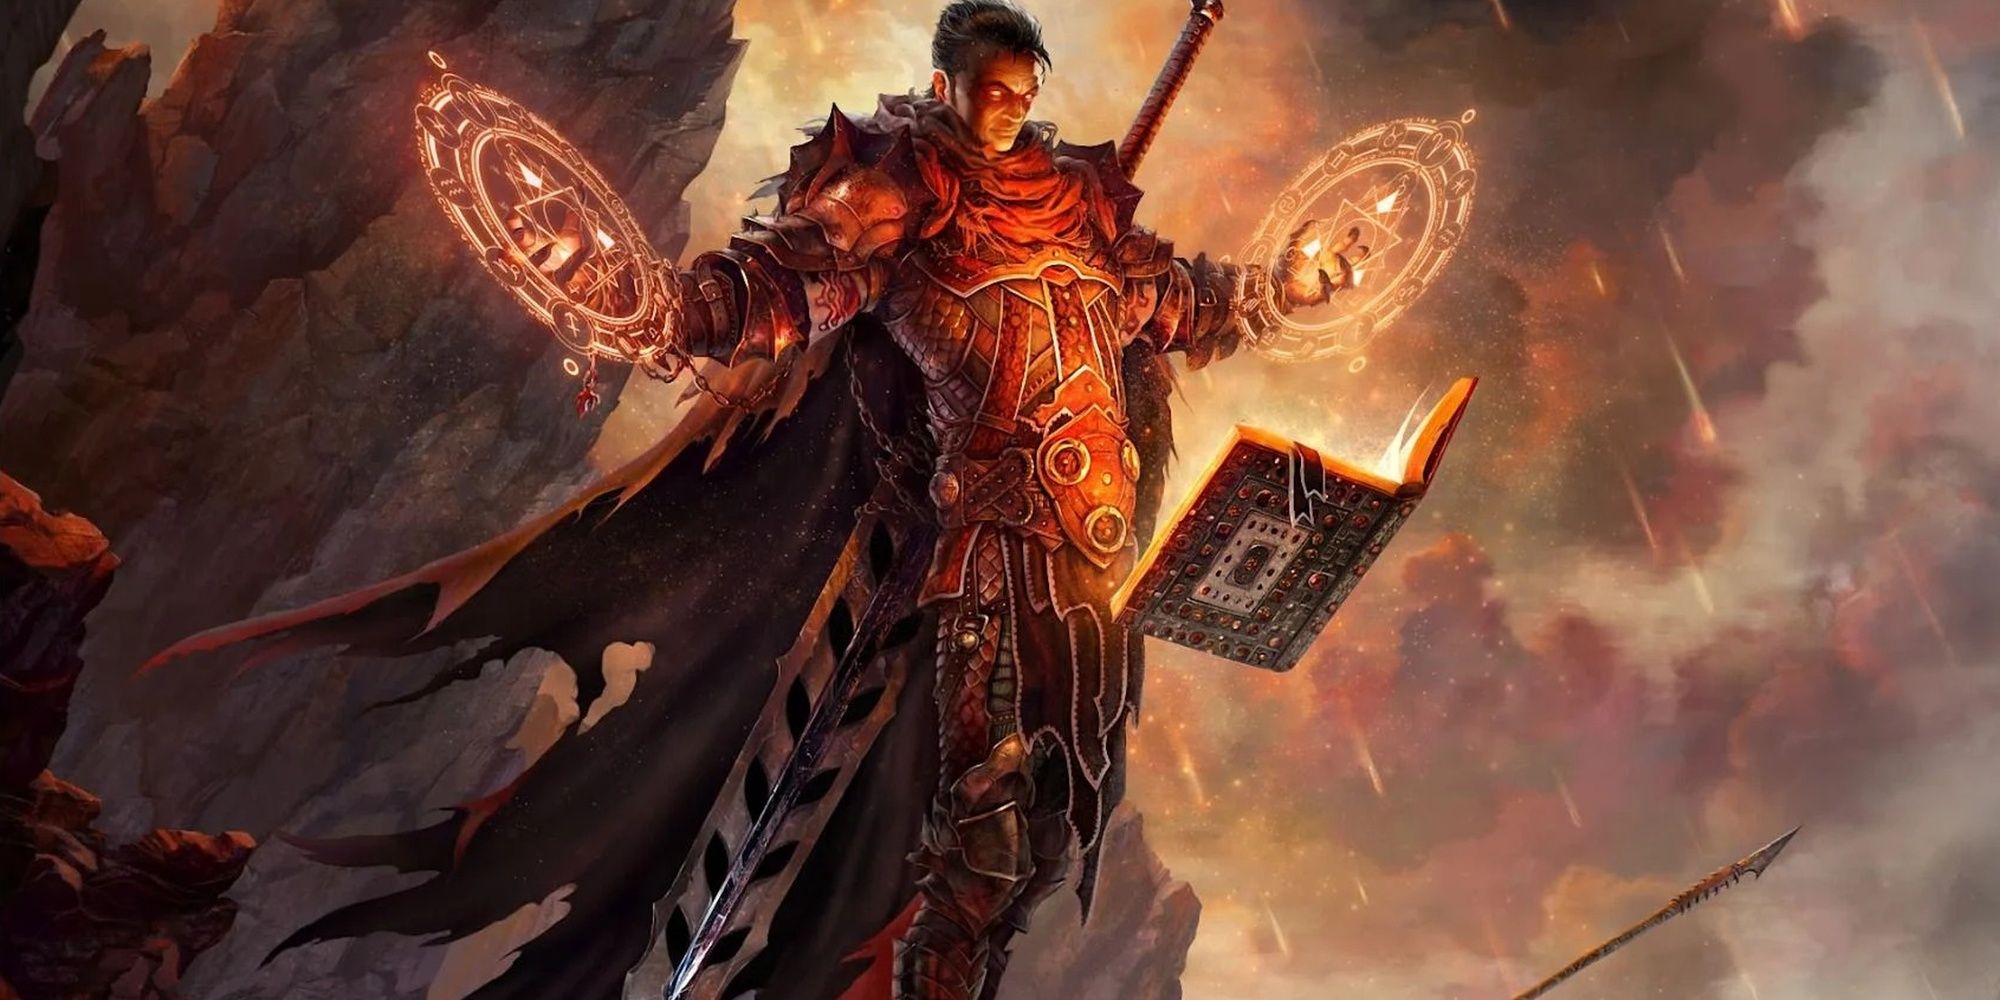 Sorcerer image from Dungeons And Dragons